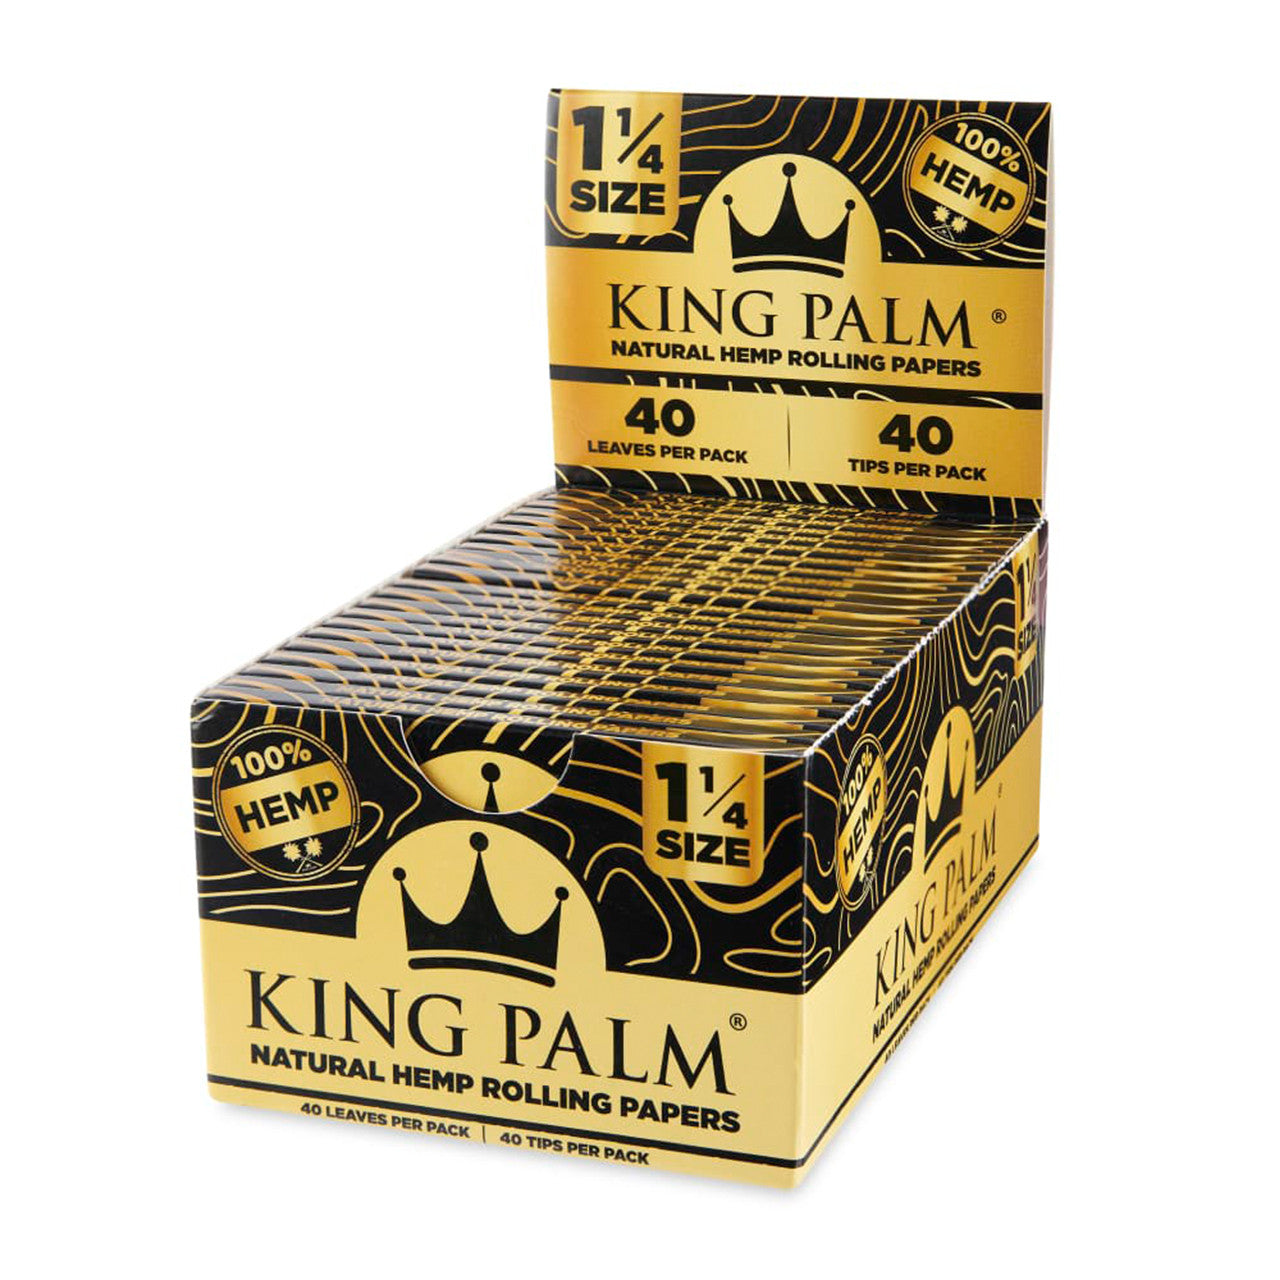 King Palm Natural Hemp Rolling Papers Display